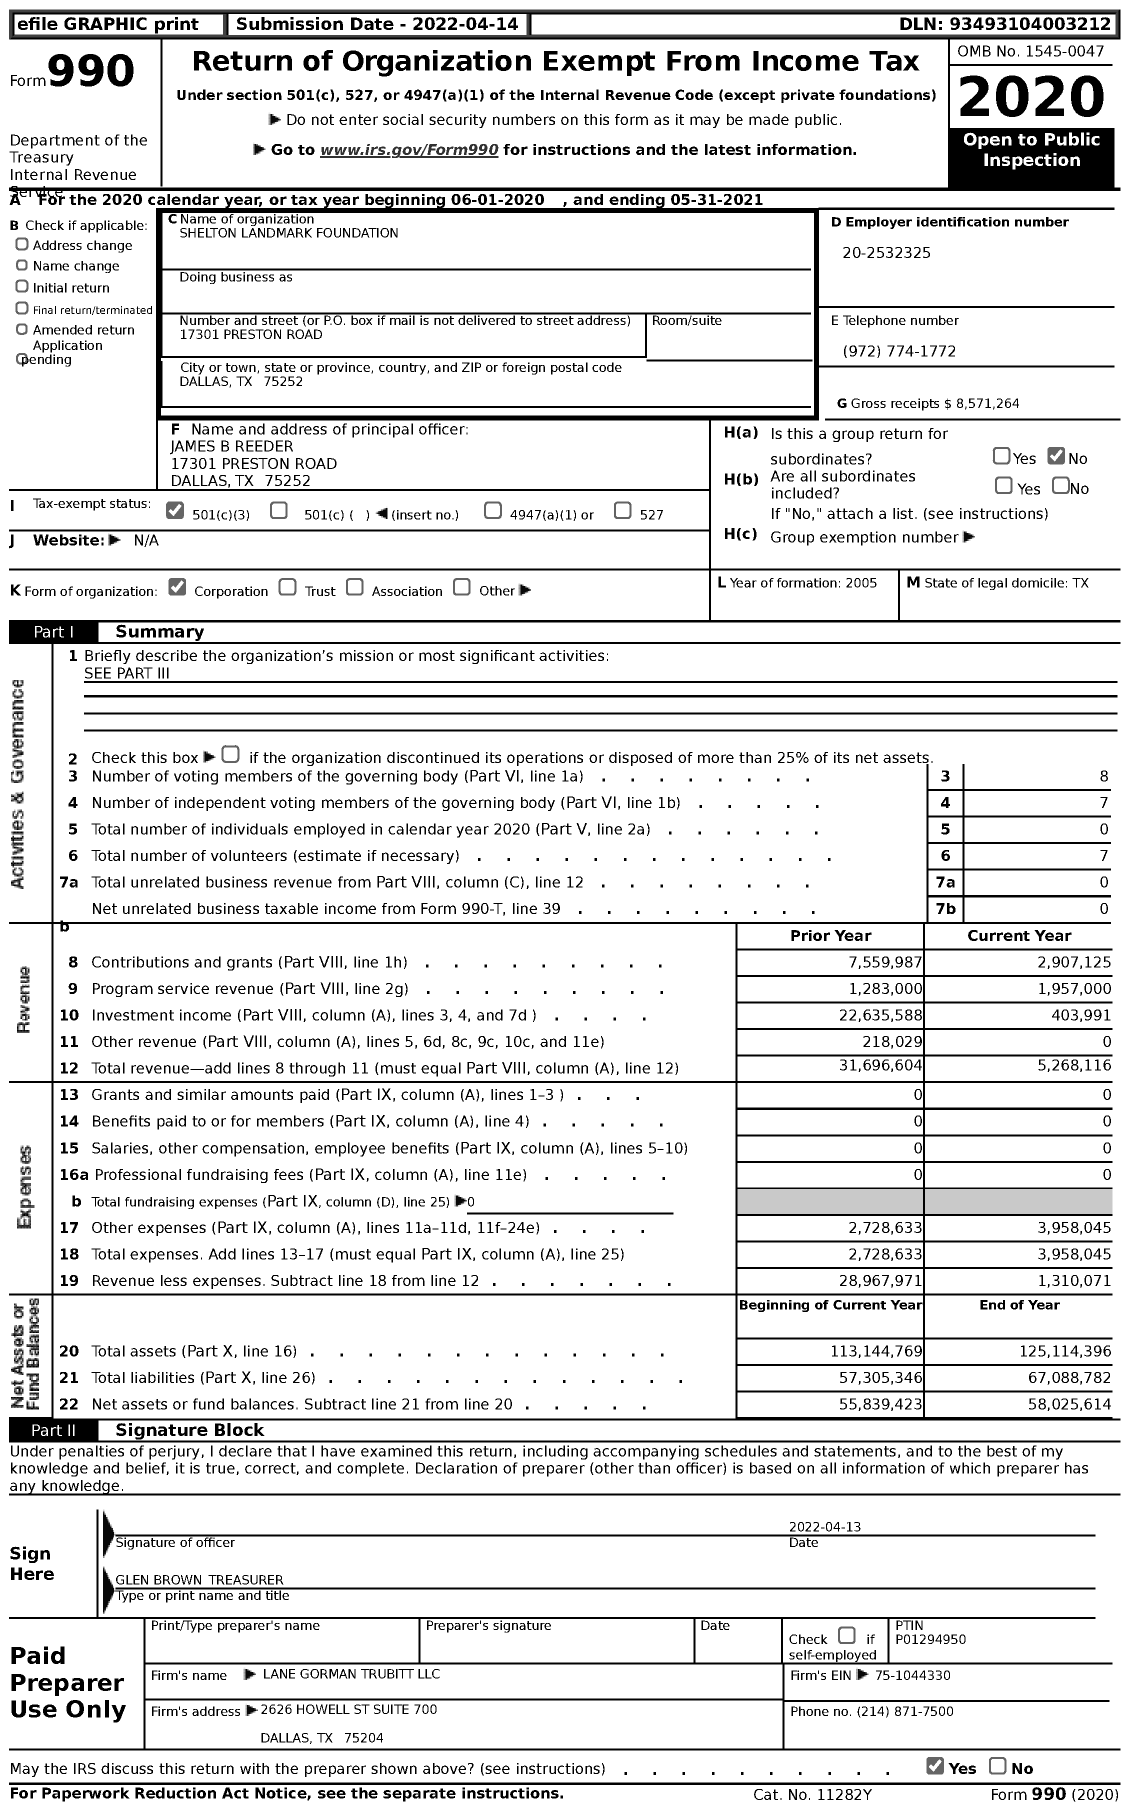 Image of first page of 2020 Form 990 for Shelton Landmark Foundation